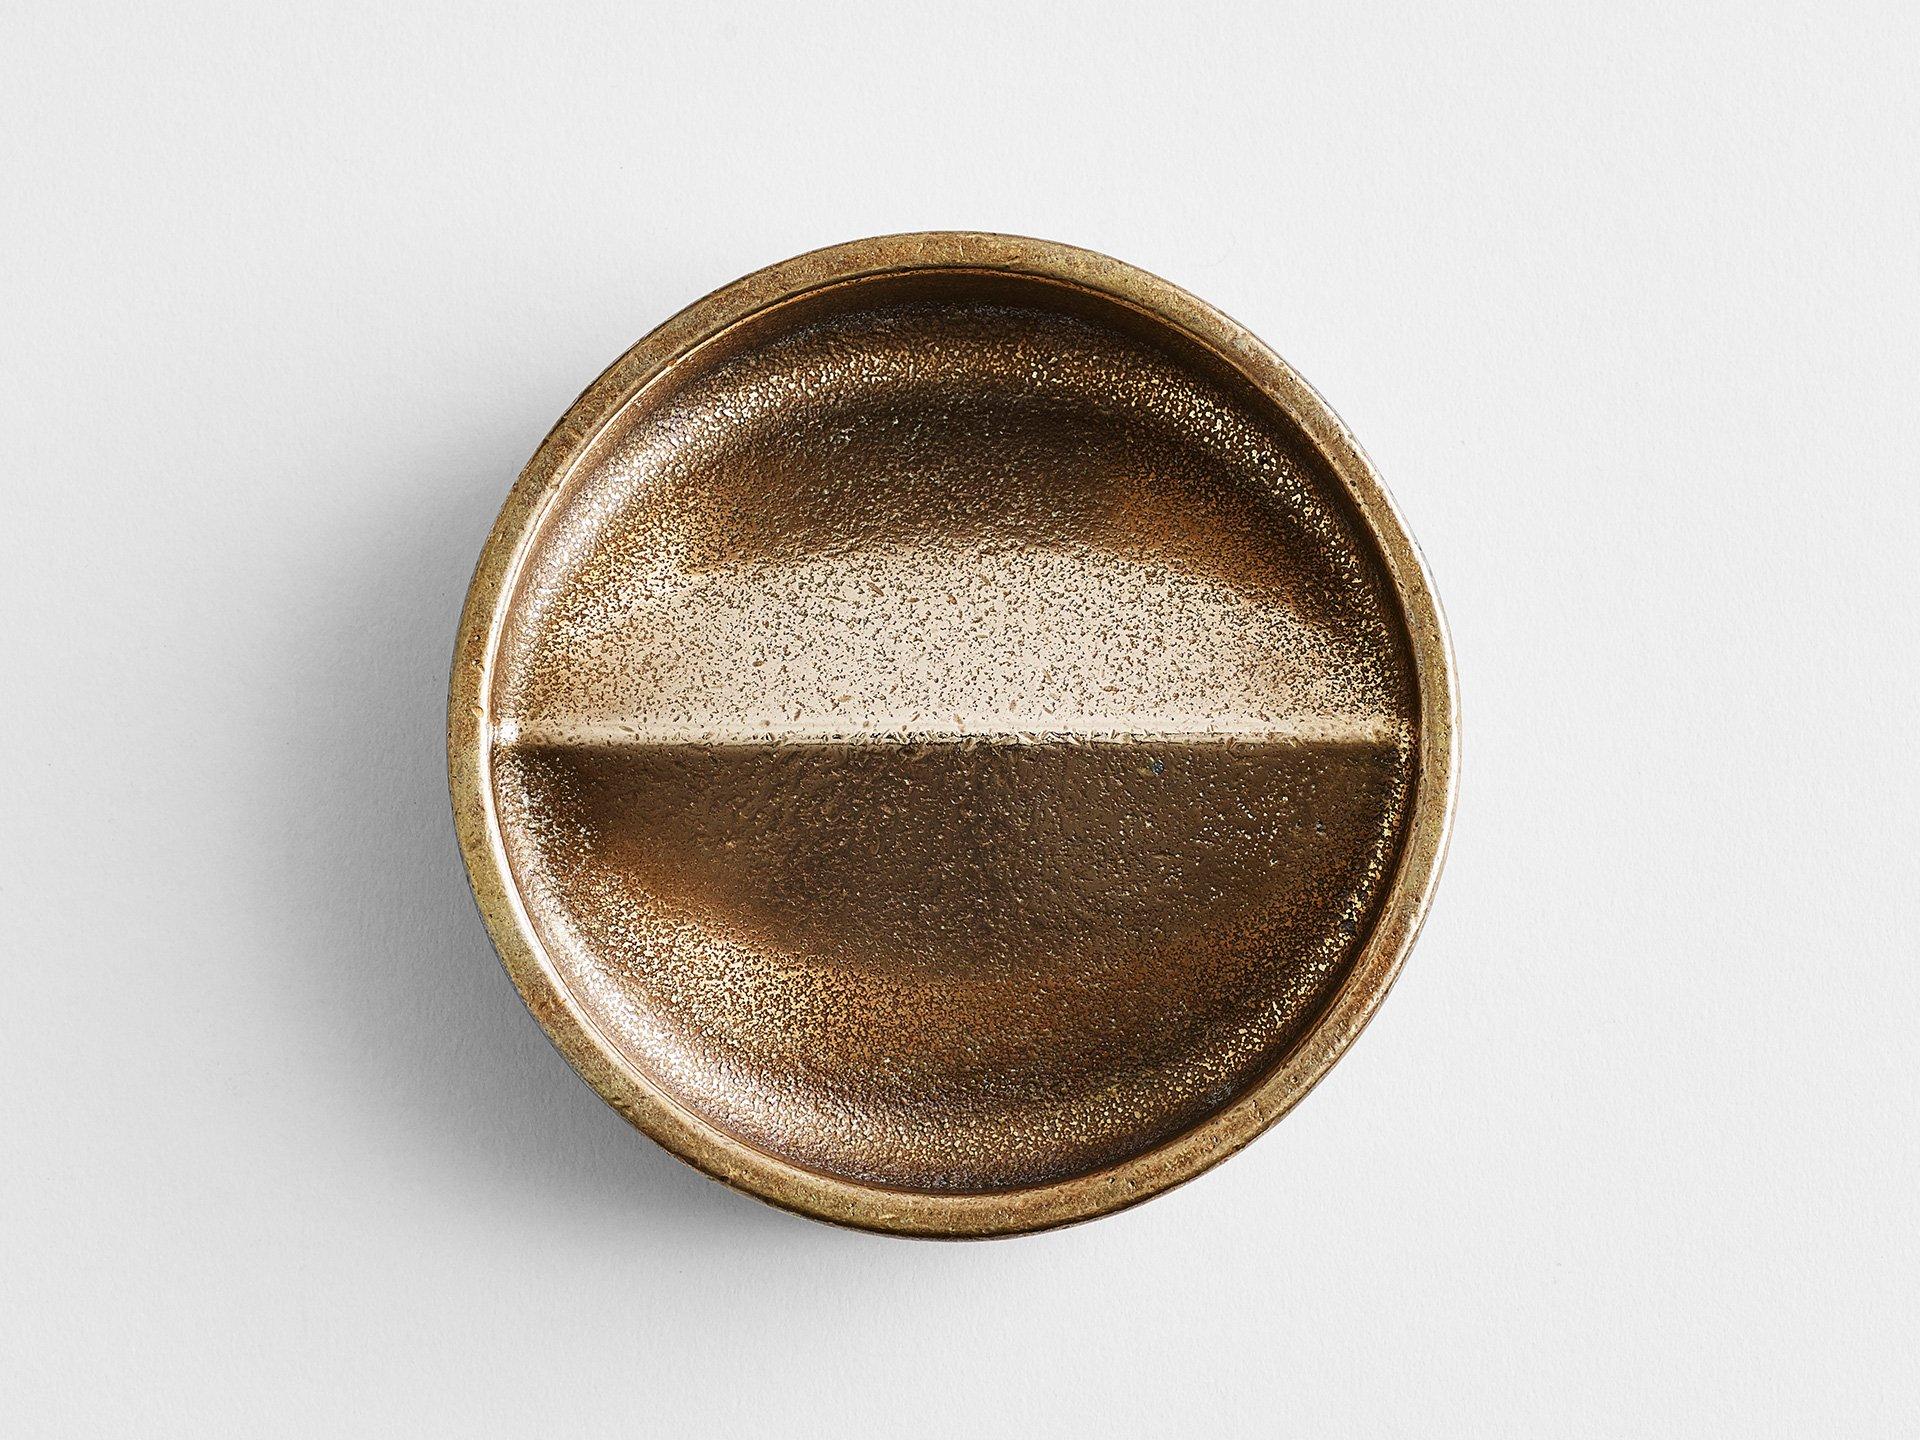 Round bronze Vide Poche by Henry Wilson
Discard your day at the door.

Your Vide Poche is designed with your loose-pocket items in mind – think keys, change and phone. It is made, polished and finished in Sydney, Australia in solid gunmetal